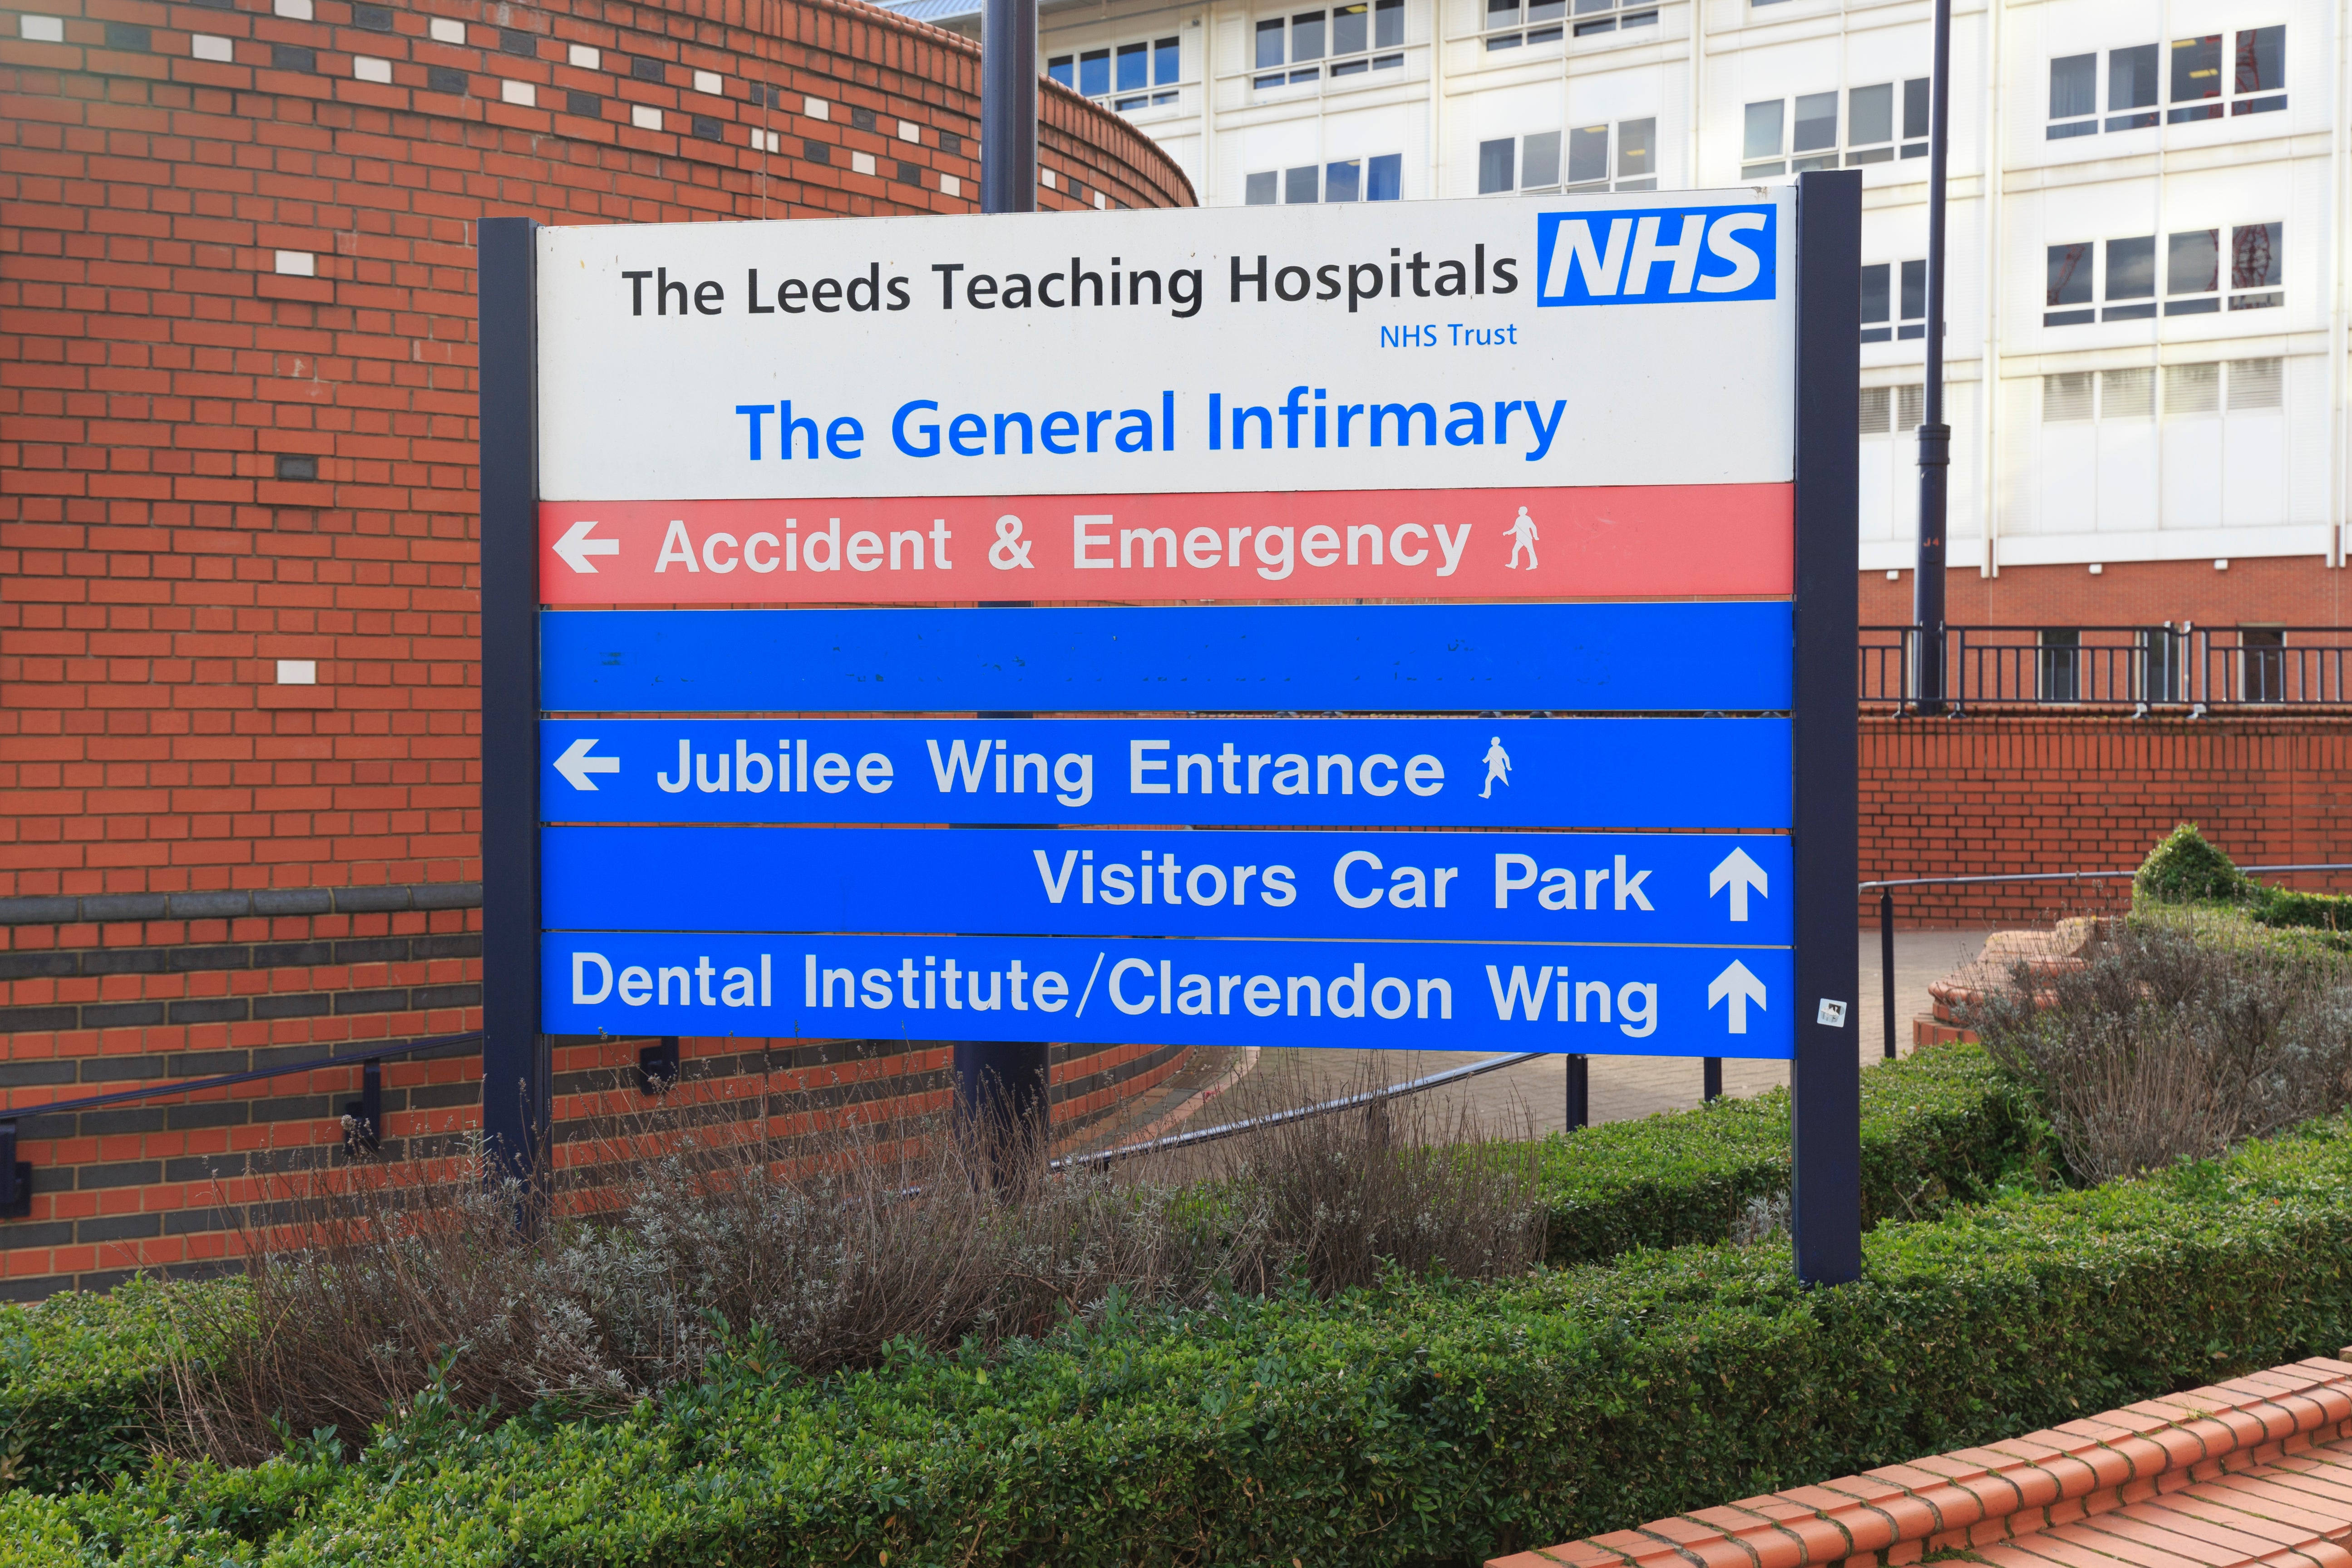 Operations have been cancelled at Leeds Teaching Hospital as numbers of coronavirus cases increase